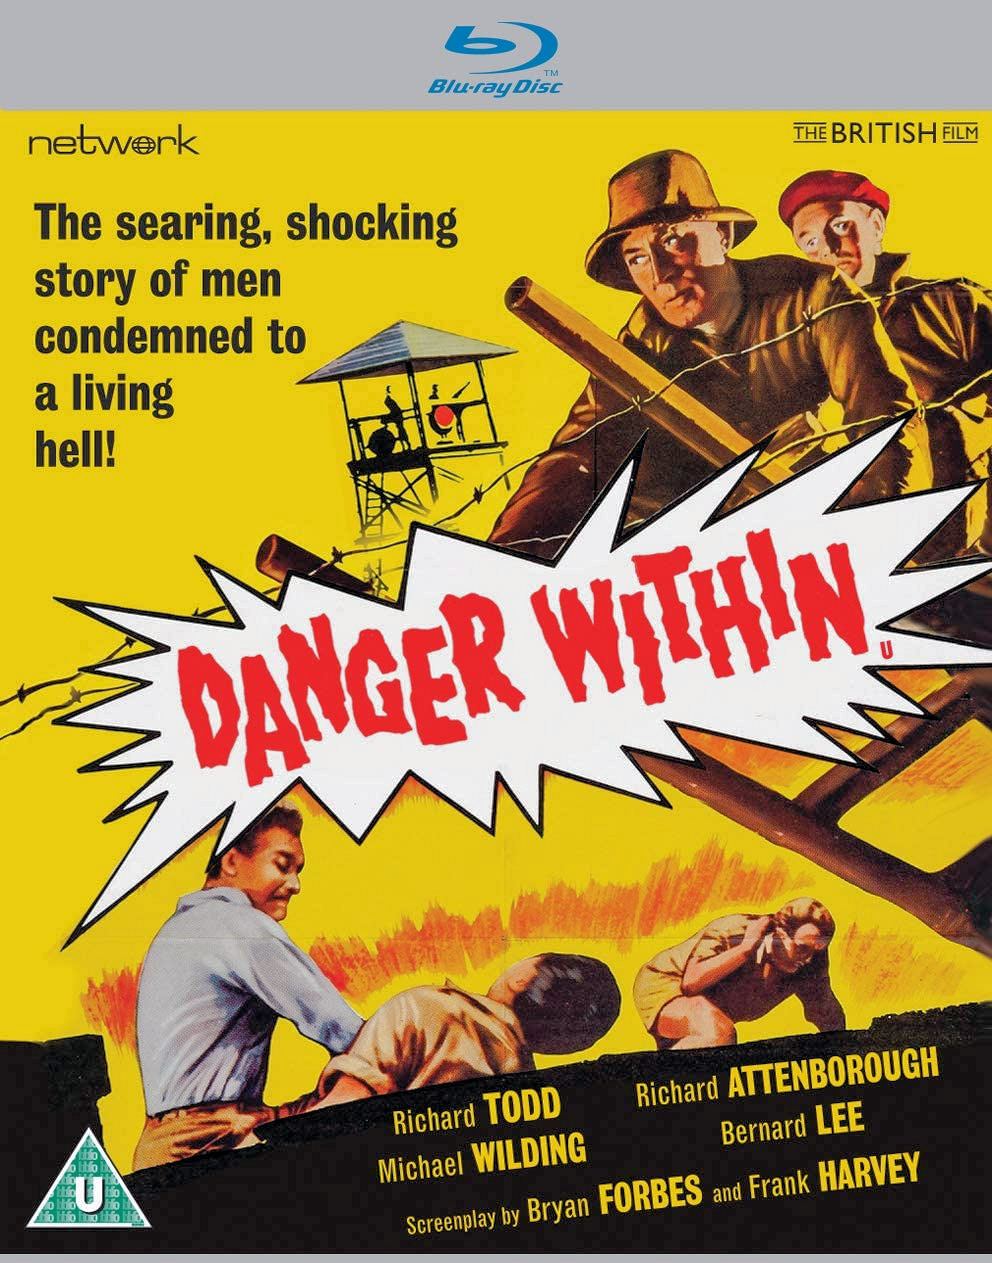 Danger Within (1959) Blu-ray from Network and the British Film (2020) (1)